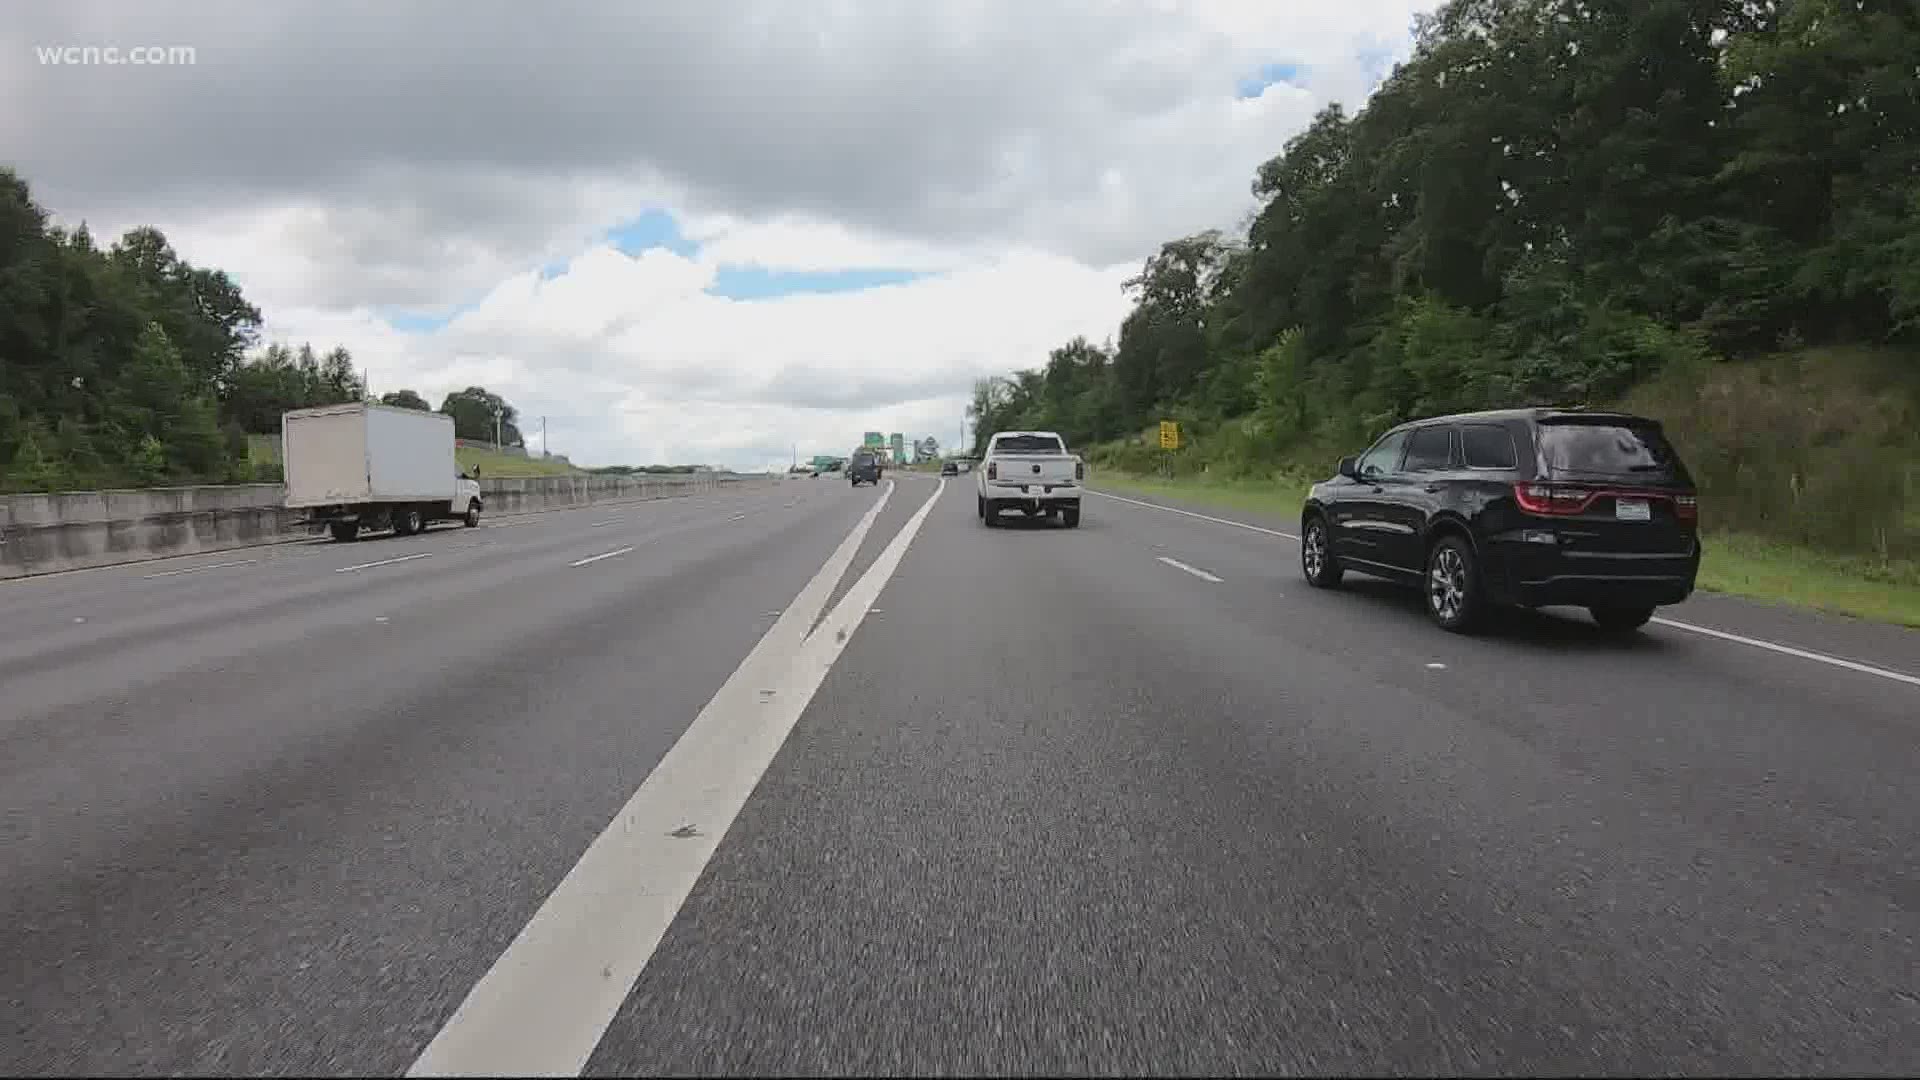 Nearly 75 million dollars was awarded by the state to upgrade Exit 85 in Fort Mill and Exit 82 in Rock Hill